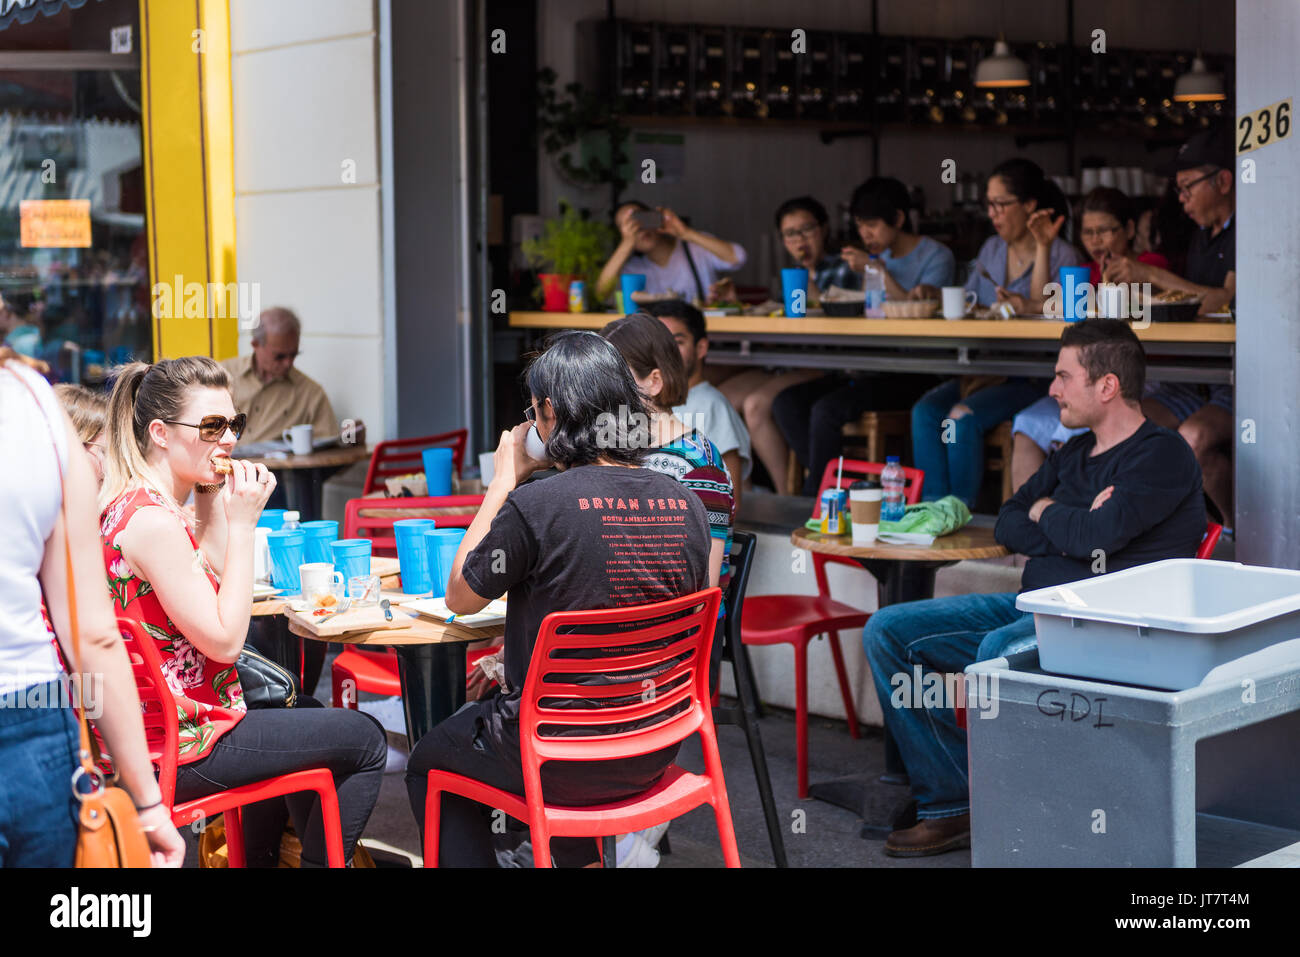 Montreal, Canada - May 28, 2017: Restaurant outside seating area with people sitting at tables at Jean-Talon farmers market Stock Photo